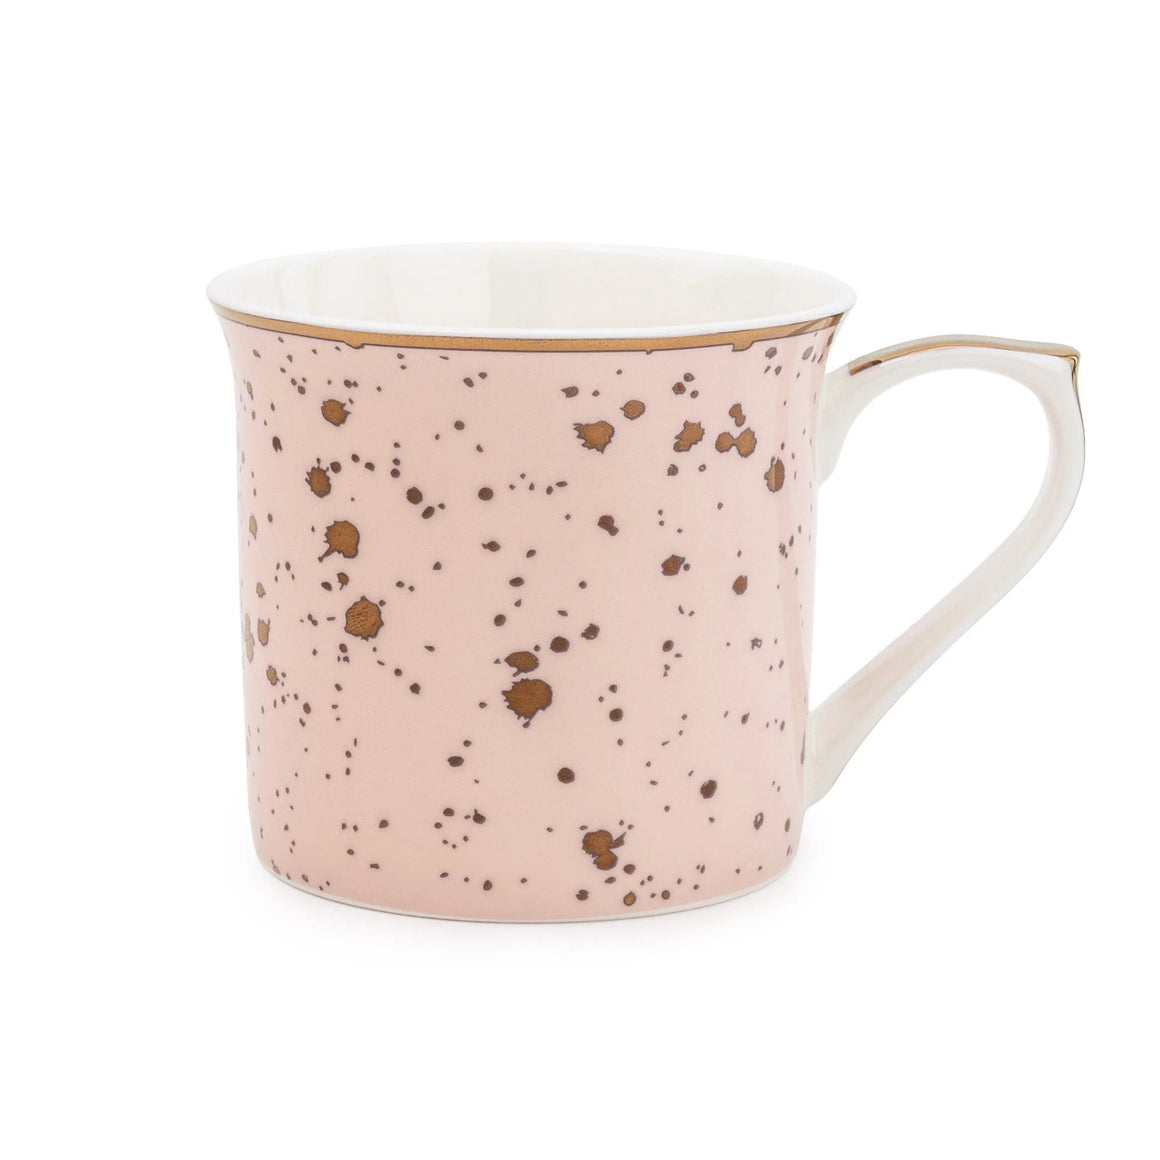 Pink & Gold Speckled Bone China Mug from Candlelight